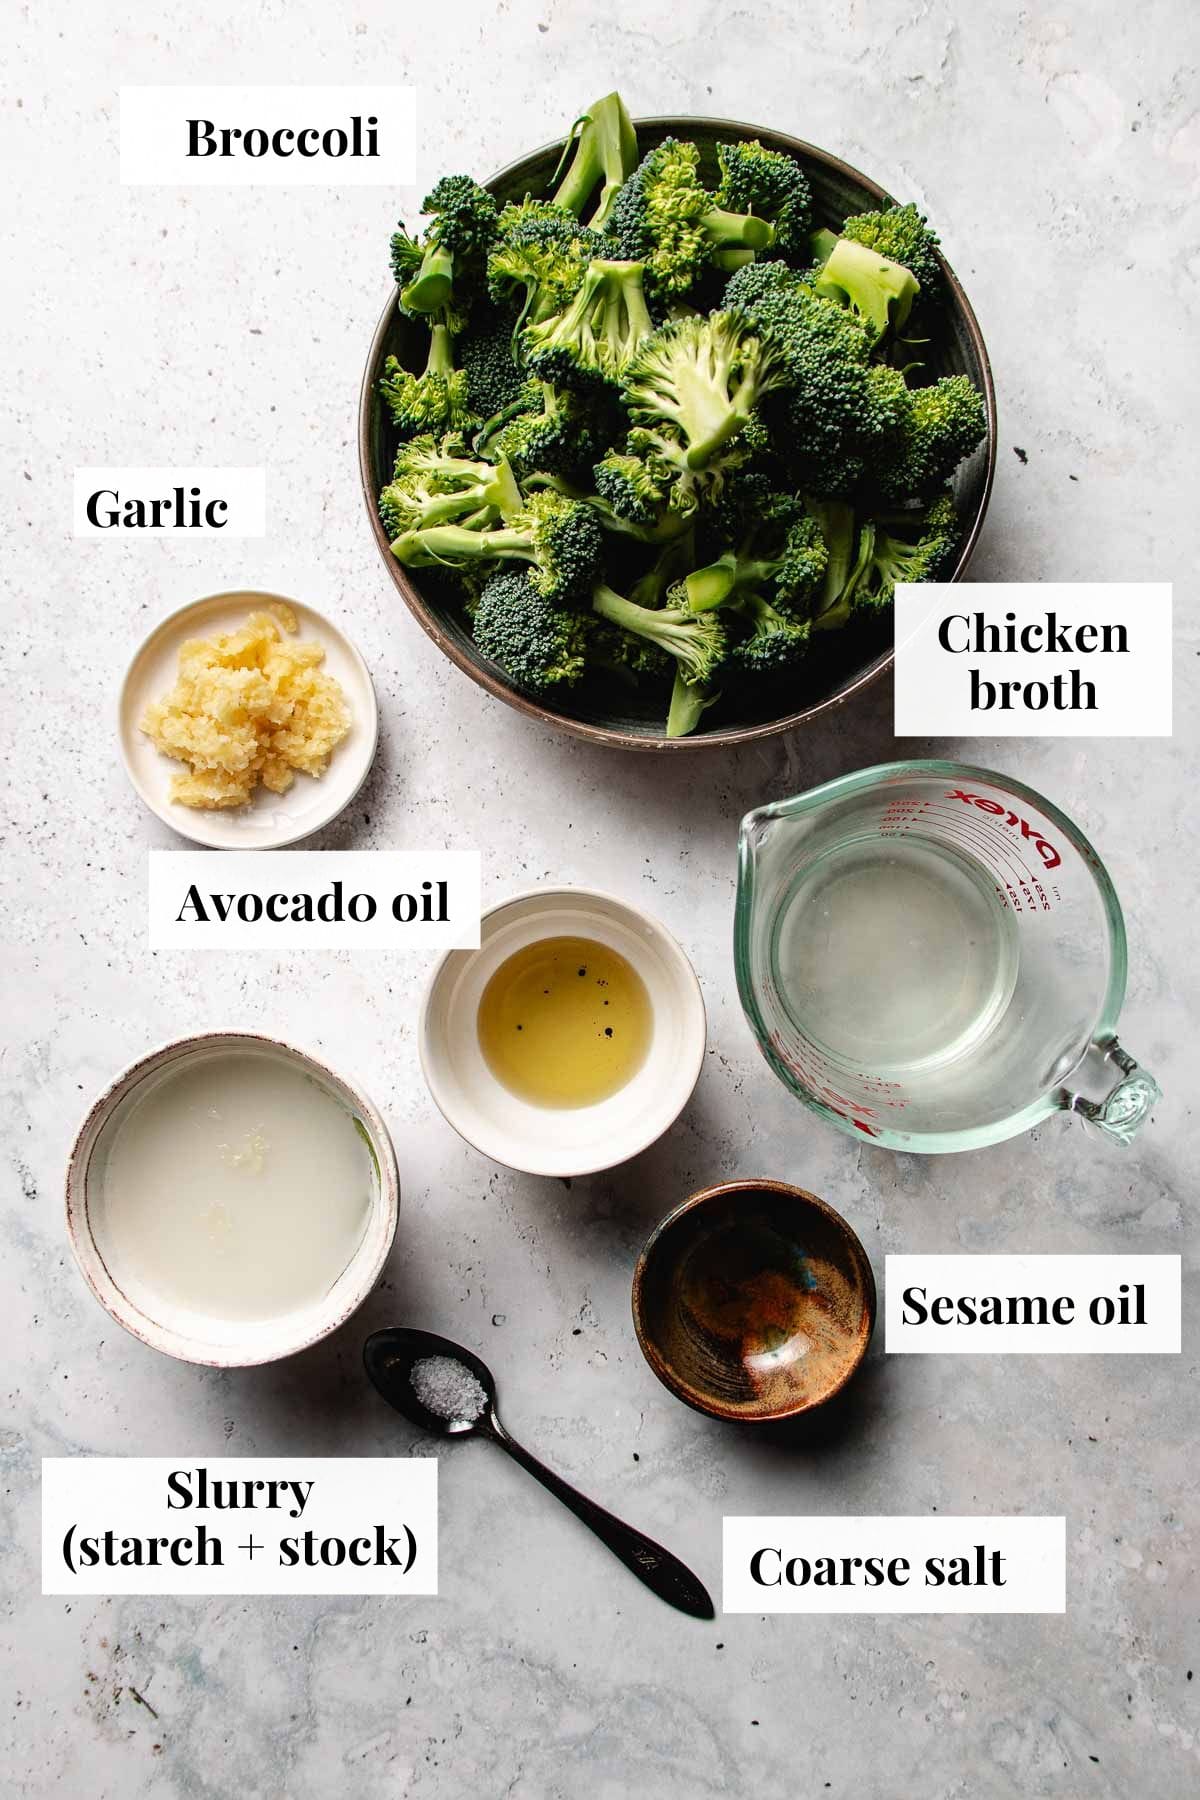 Photo shows ingredients needed to make broccoli in garlic sauce.